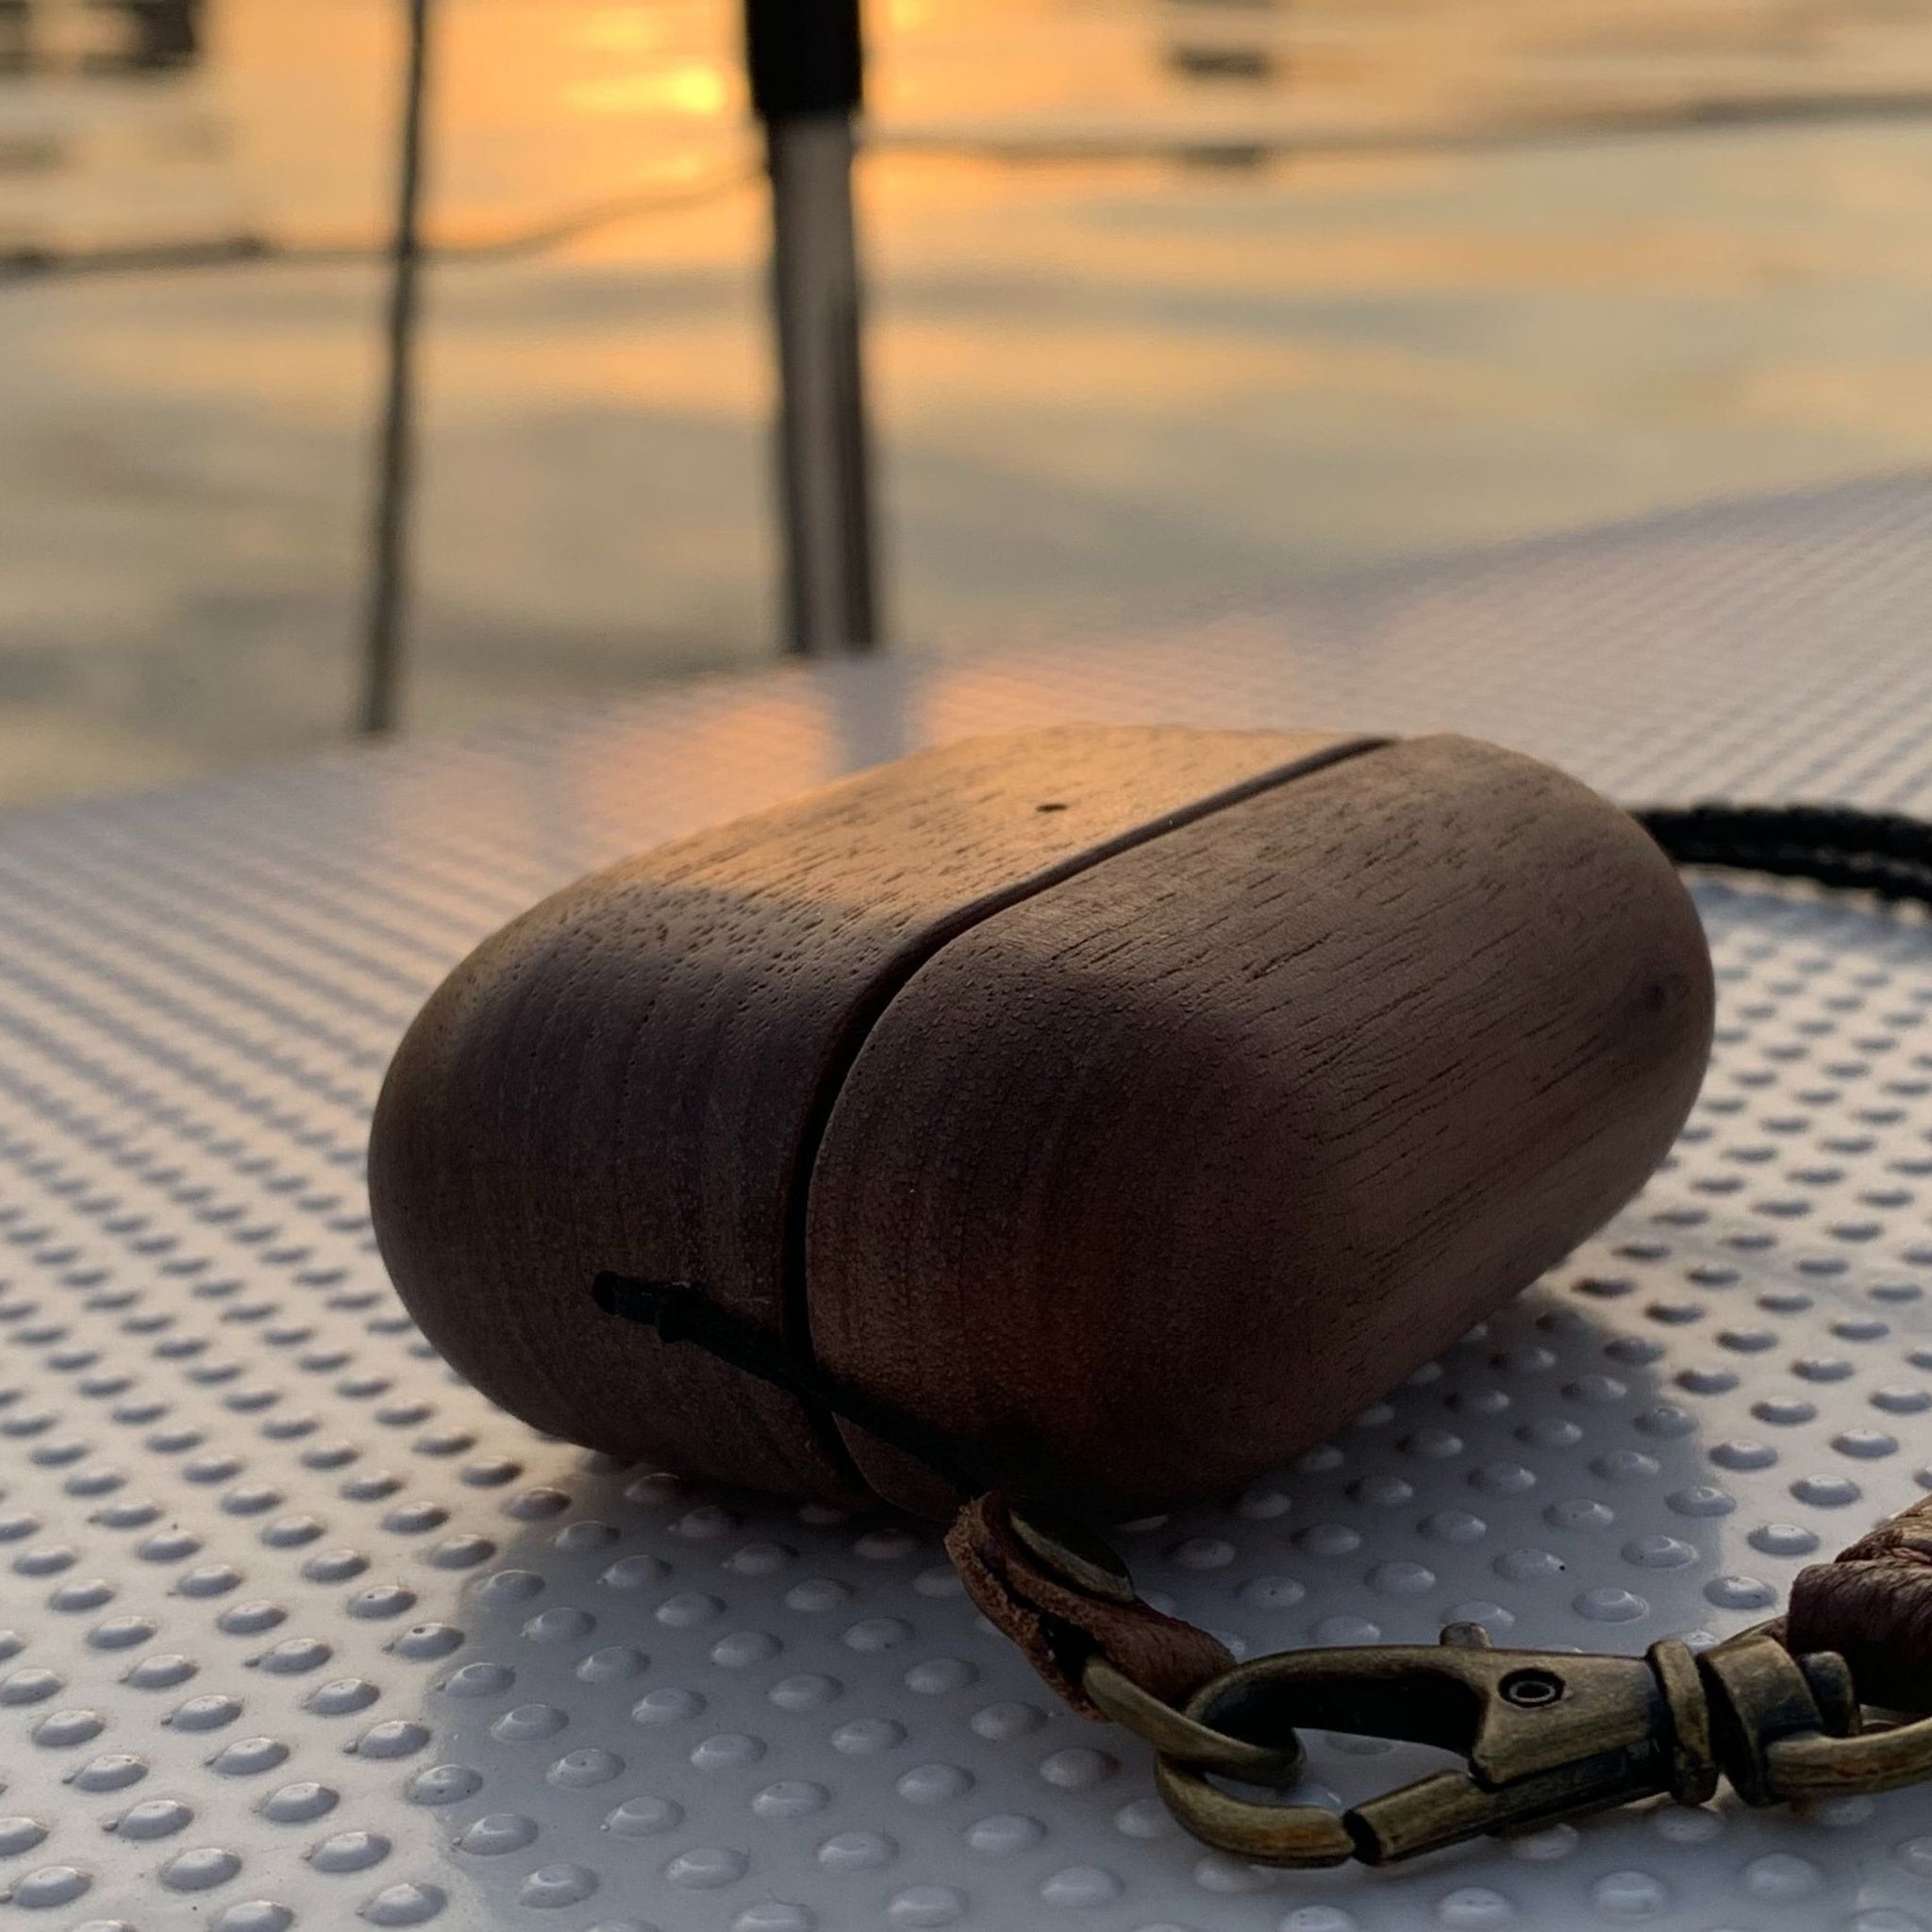 Apple Airpods wooden case